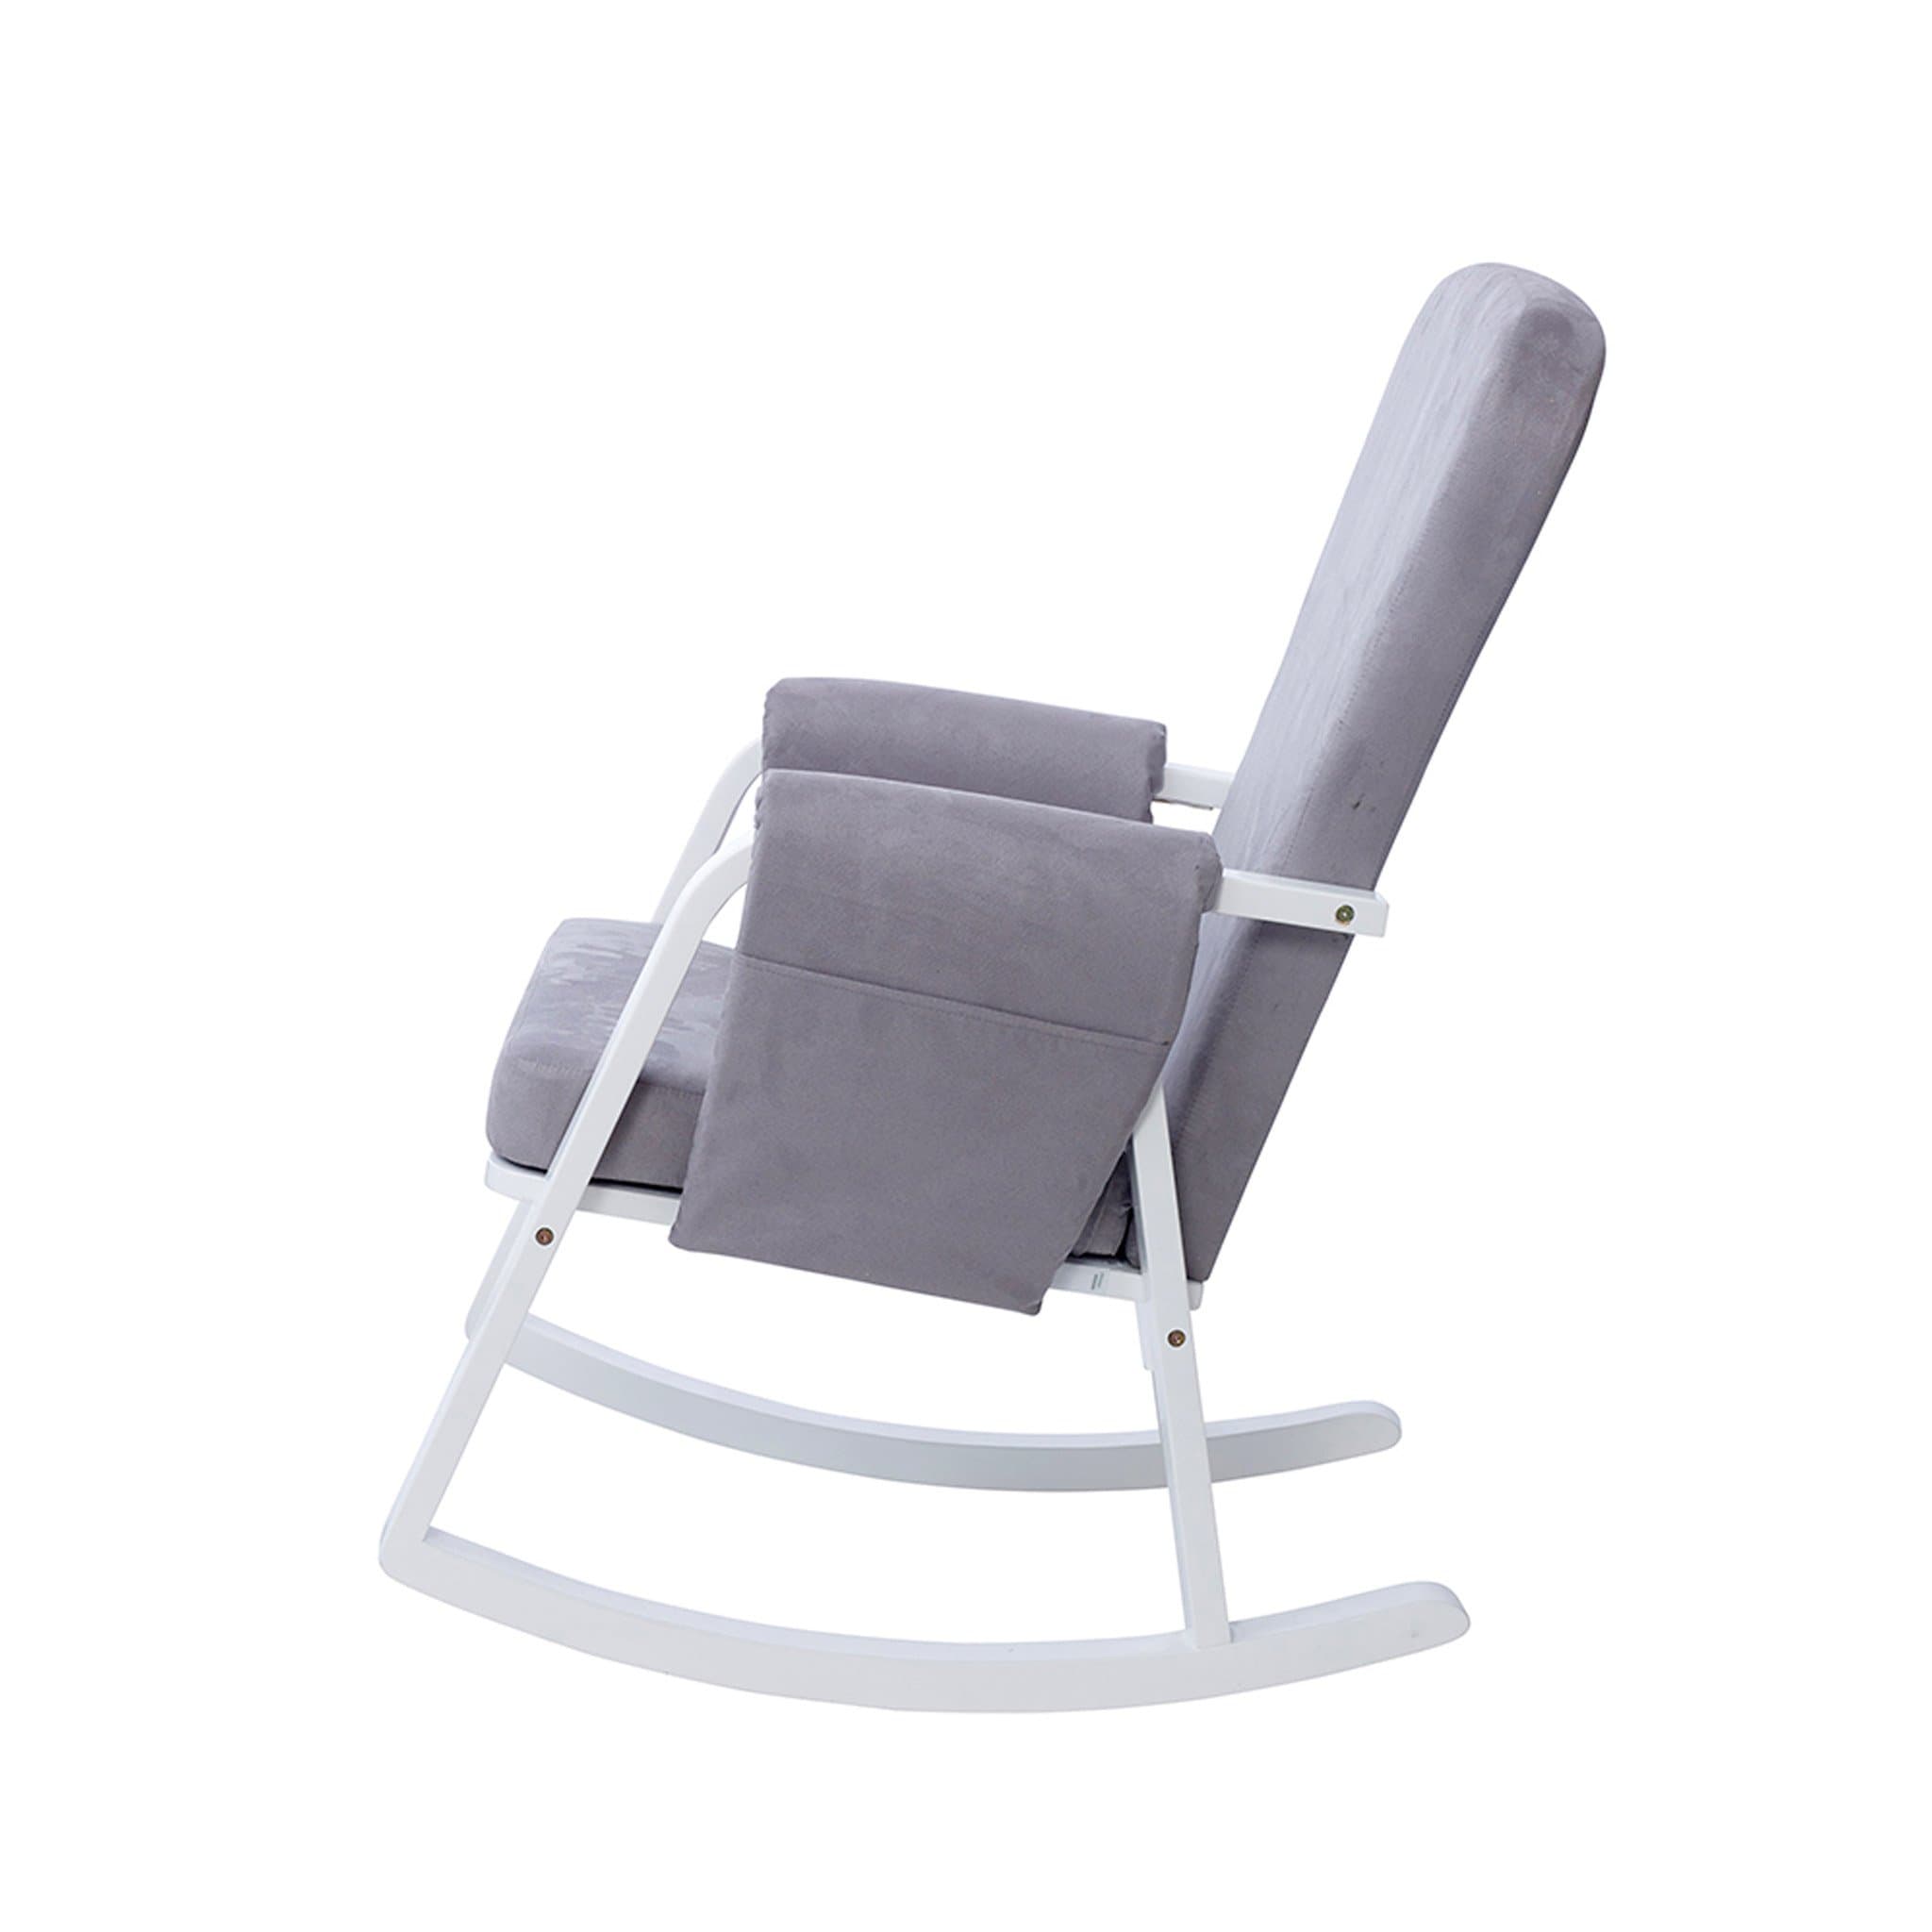 Ickle Bubba nursing chairs Ickle Bubba Dursley Rocking Chair Pearl Grey 48-004-000-840